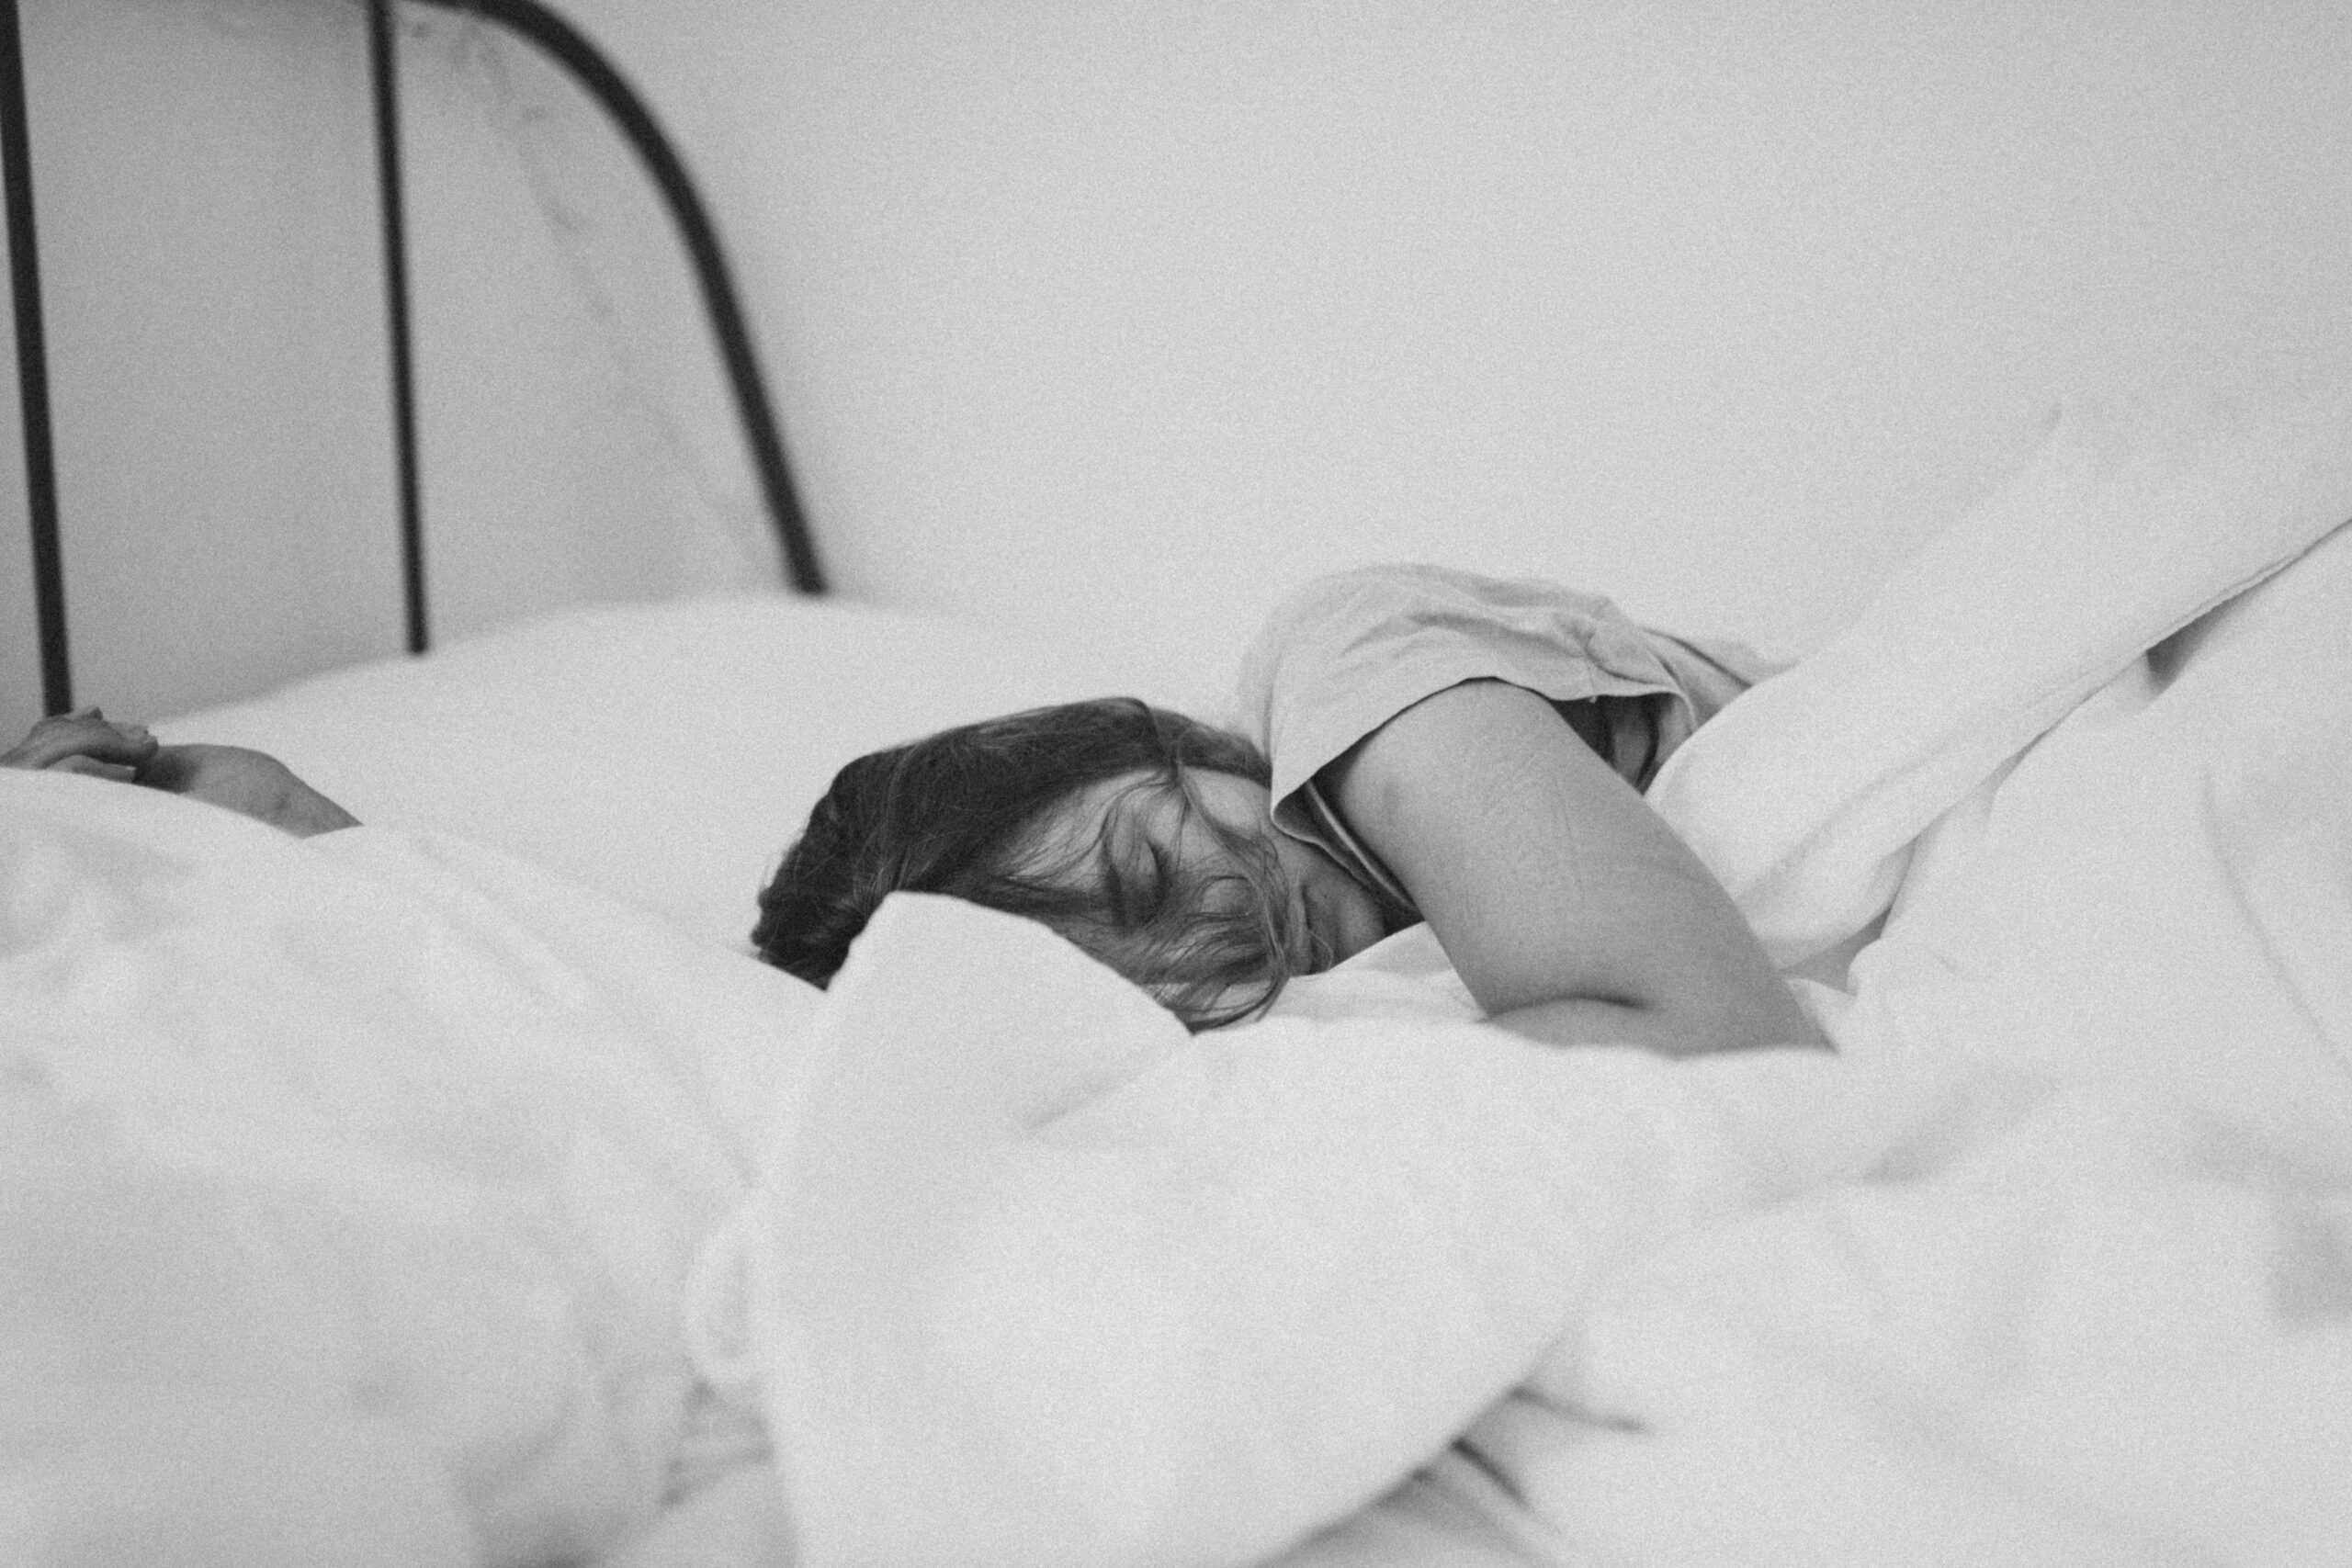 Black and white photo of person sleeping in bed. White sheets and pillowcases